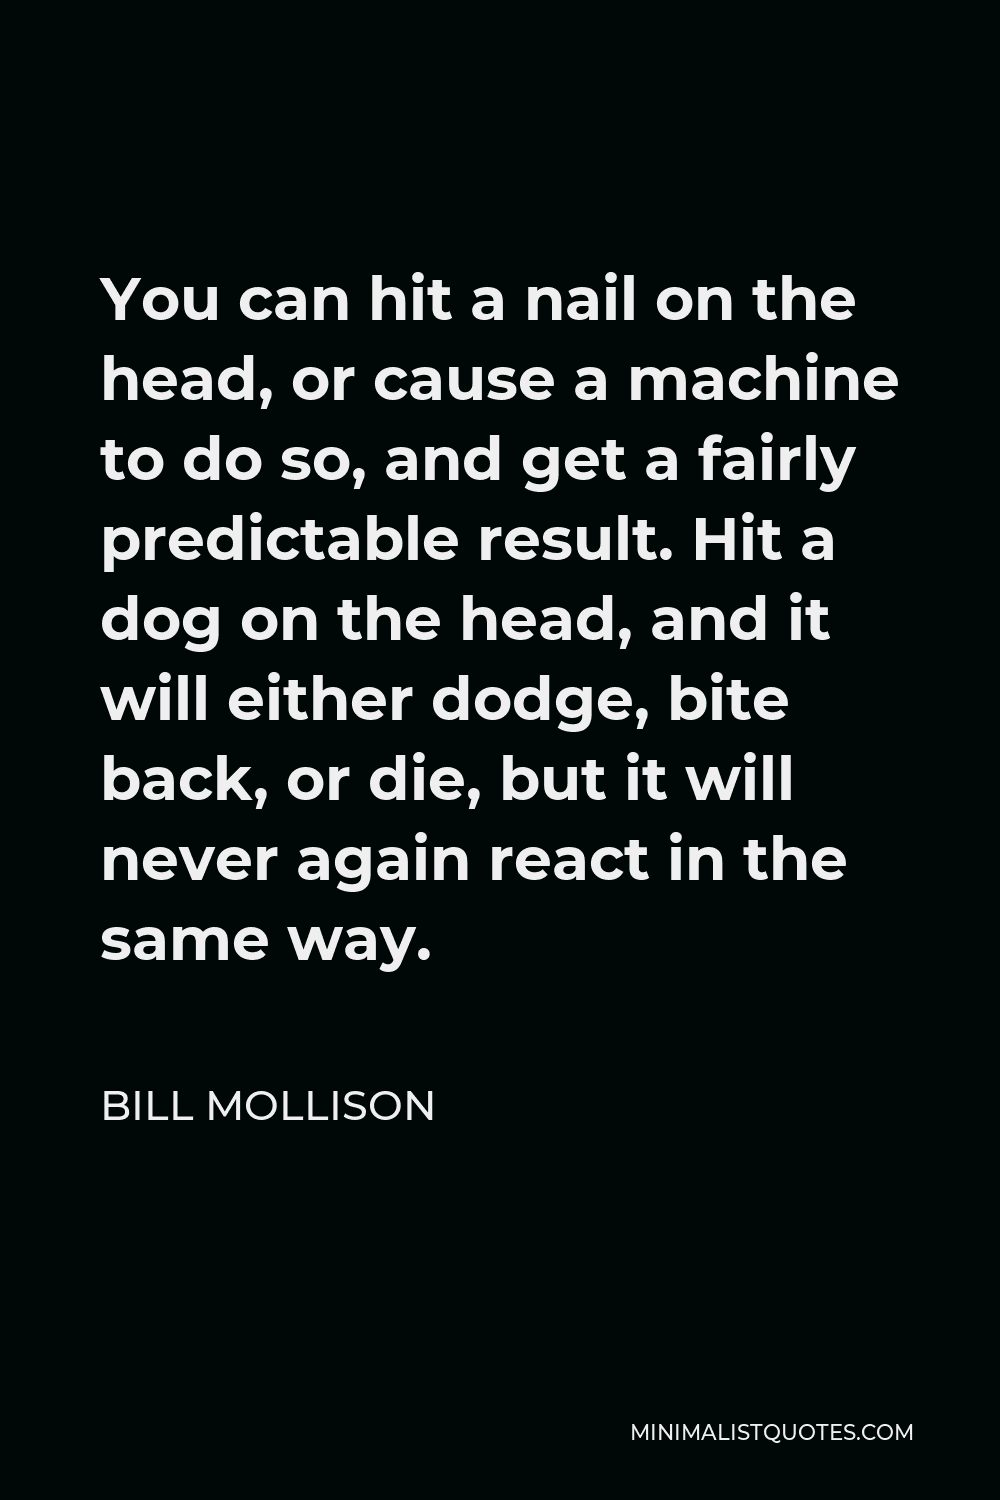 Bill Mollison Quote: You can hit a nail on the head, or cause a machine to  do so, and get a fairly predictable result. Hit a dog on the head, and it